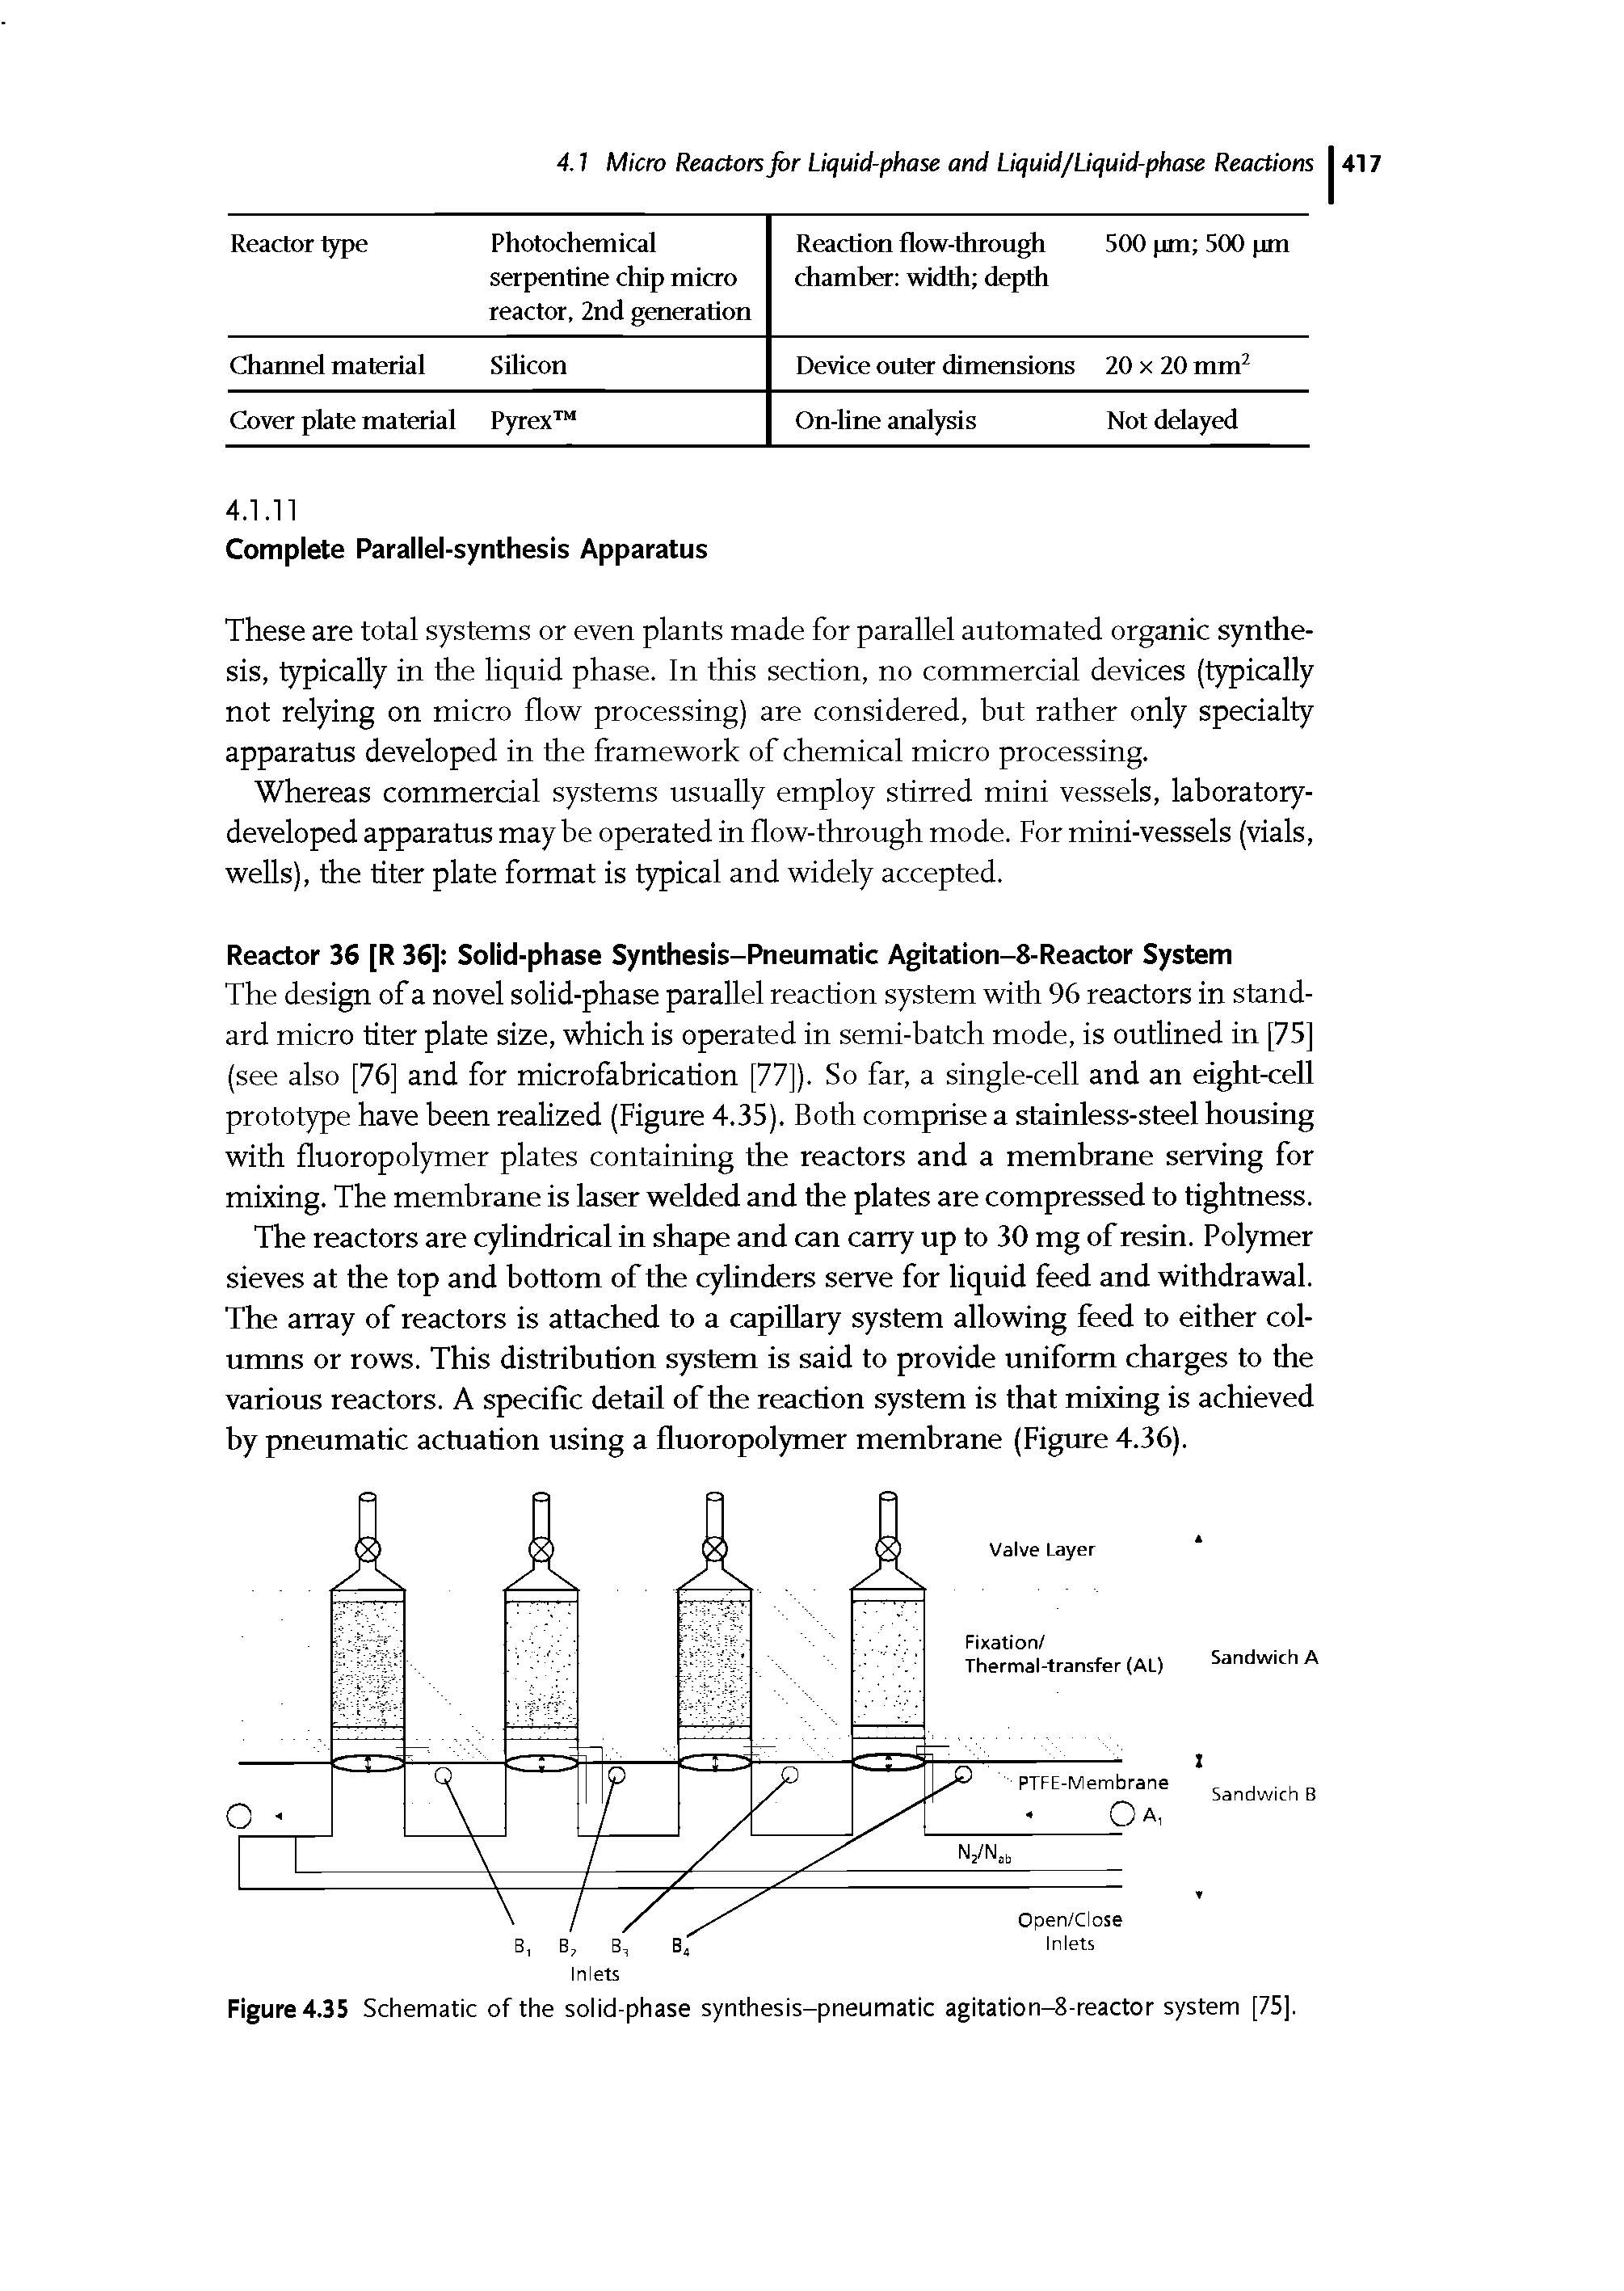 Figure 4.35 Schematic of the solid-phase synthesis-pneumatic agitation-8-reactor system [75].